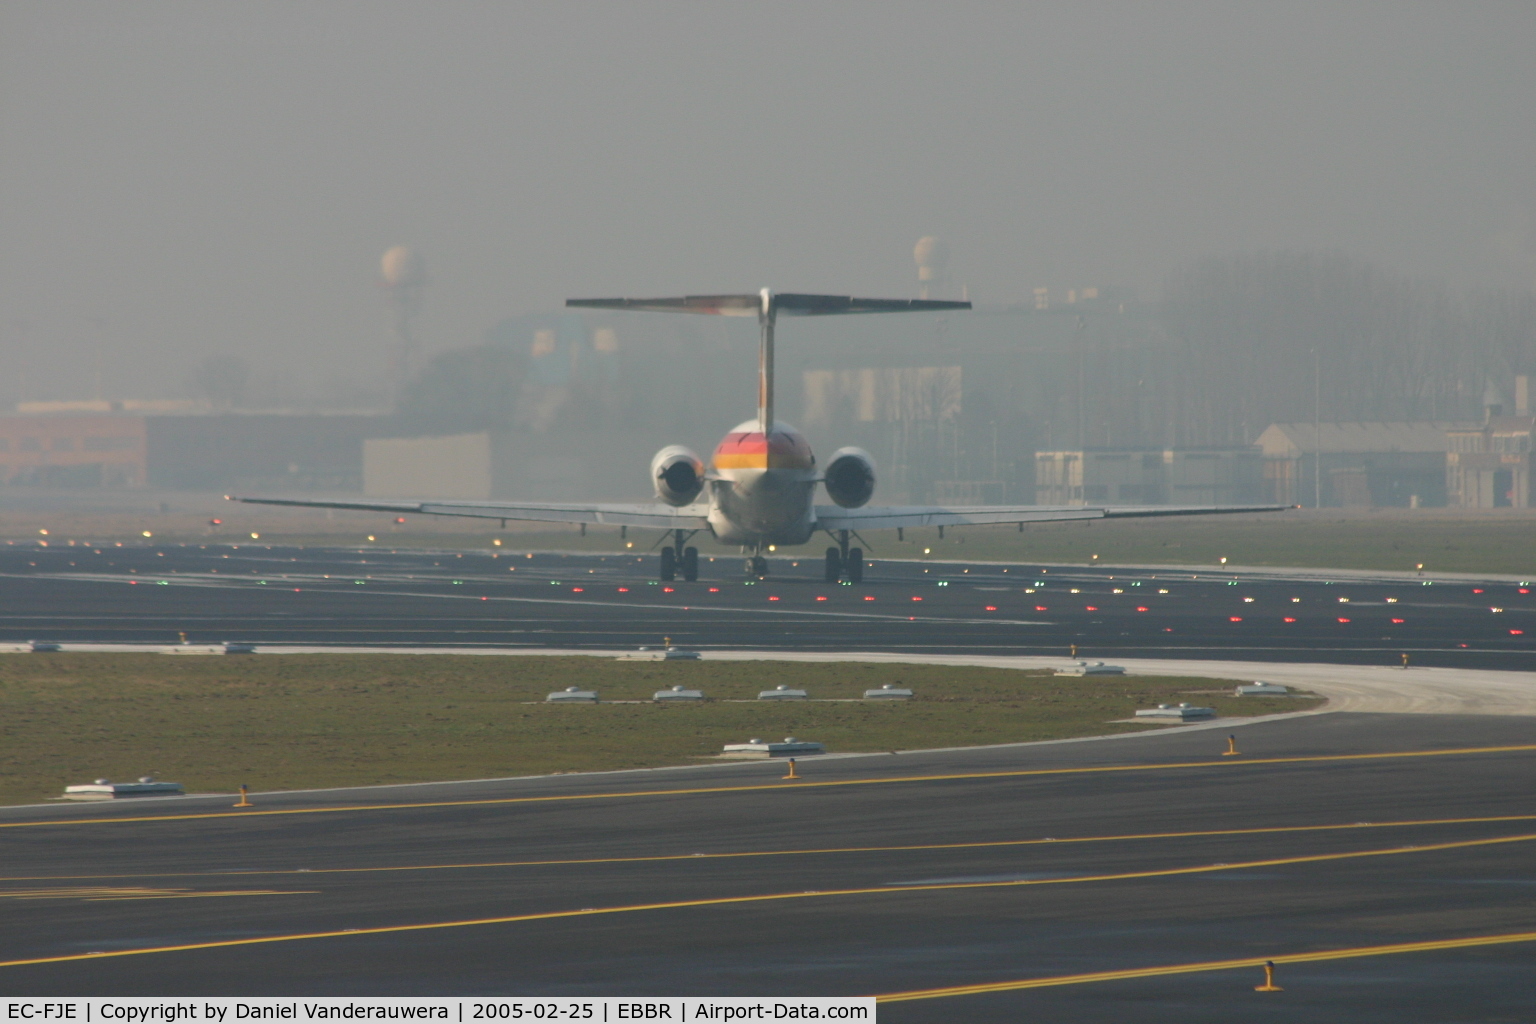 EC-FJE, 1991 McDonnell Douglas MD-88 C/N 53197, manoeuvring to align on rwy 25R to take off